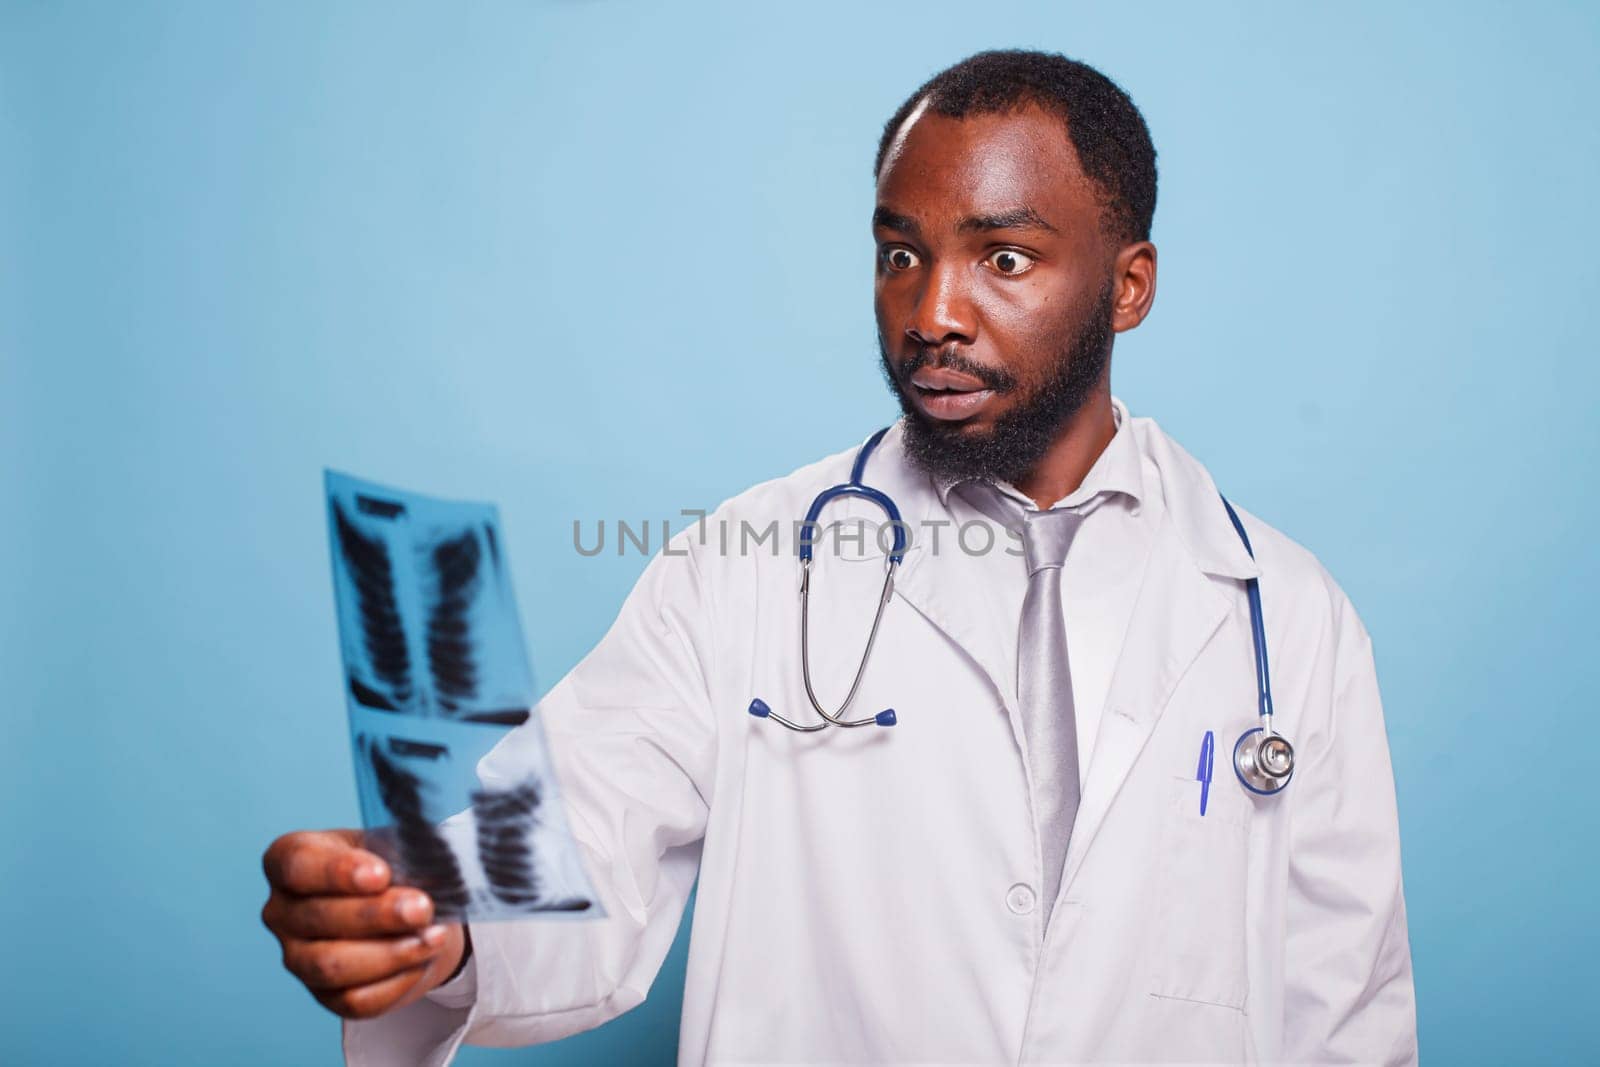 Shocked doctor wearing white lab coat and stethoscope staring at a chest x-ray image that shows alarming test results. Medical professional holding a diagnosis of pulmonary radiography.